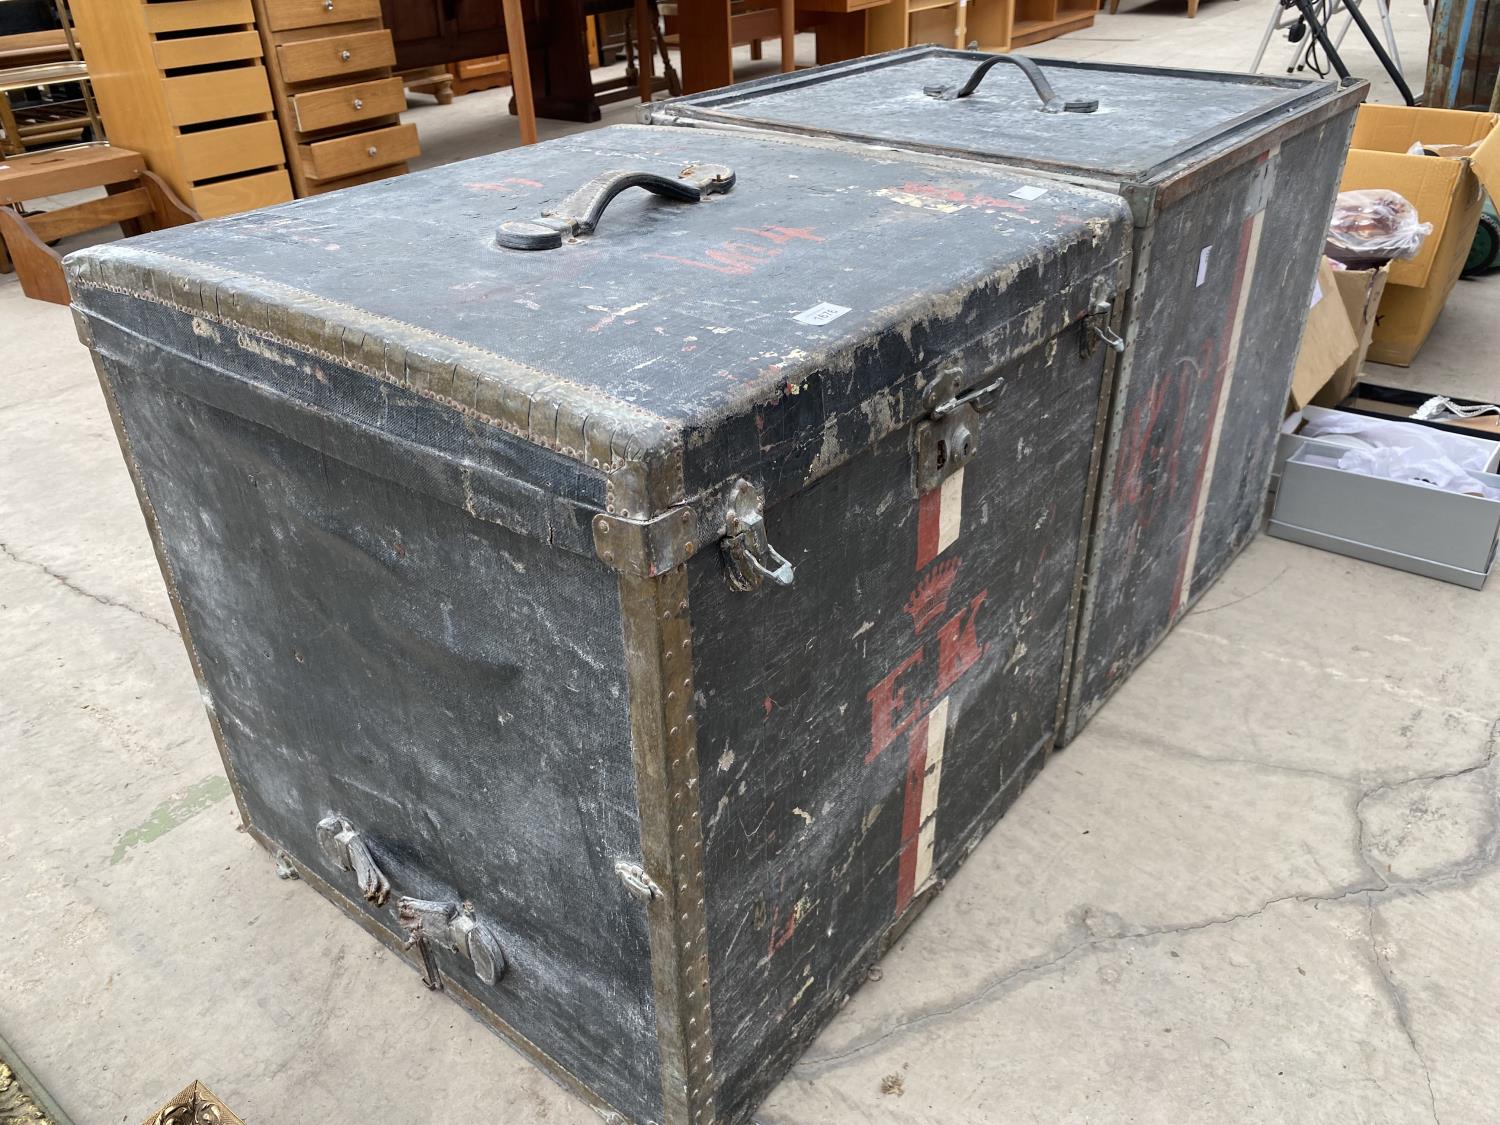 TWO LARGE VINTAGE STORAGE CASES - Image 2 of 4